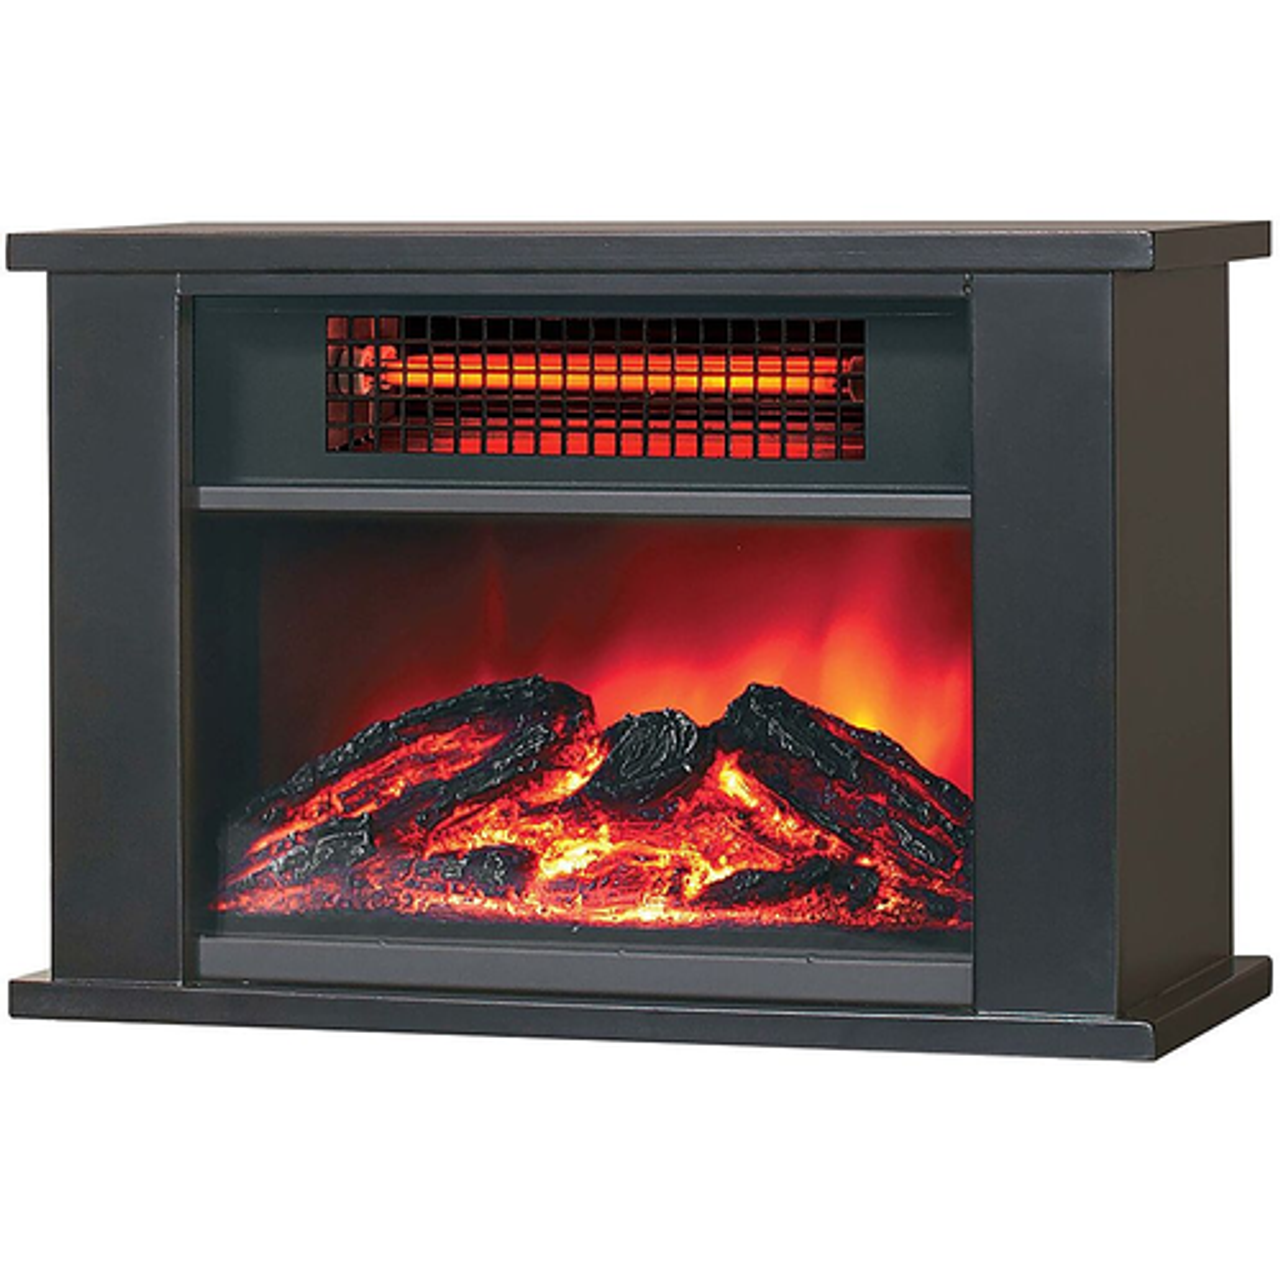 Lifesmart - 1000W Tabletop Infrared Fireplace Space Heater - Black